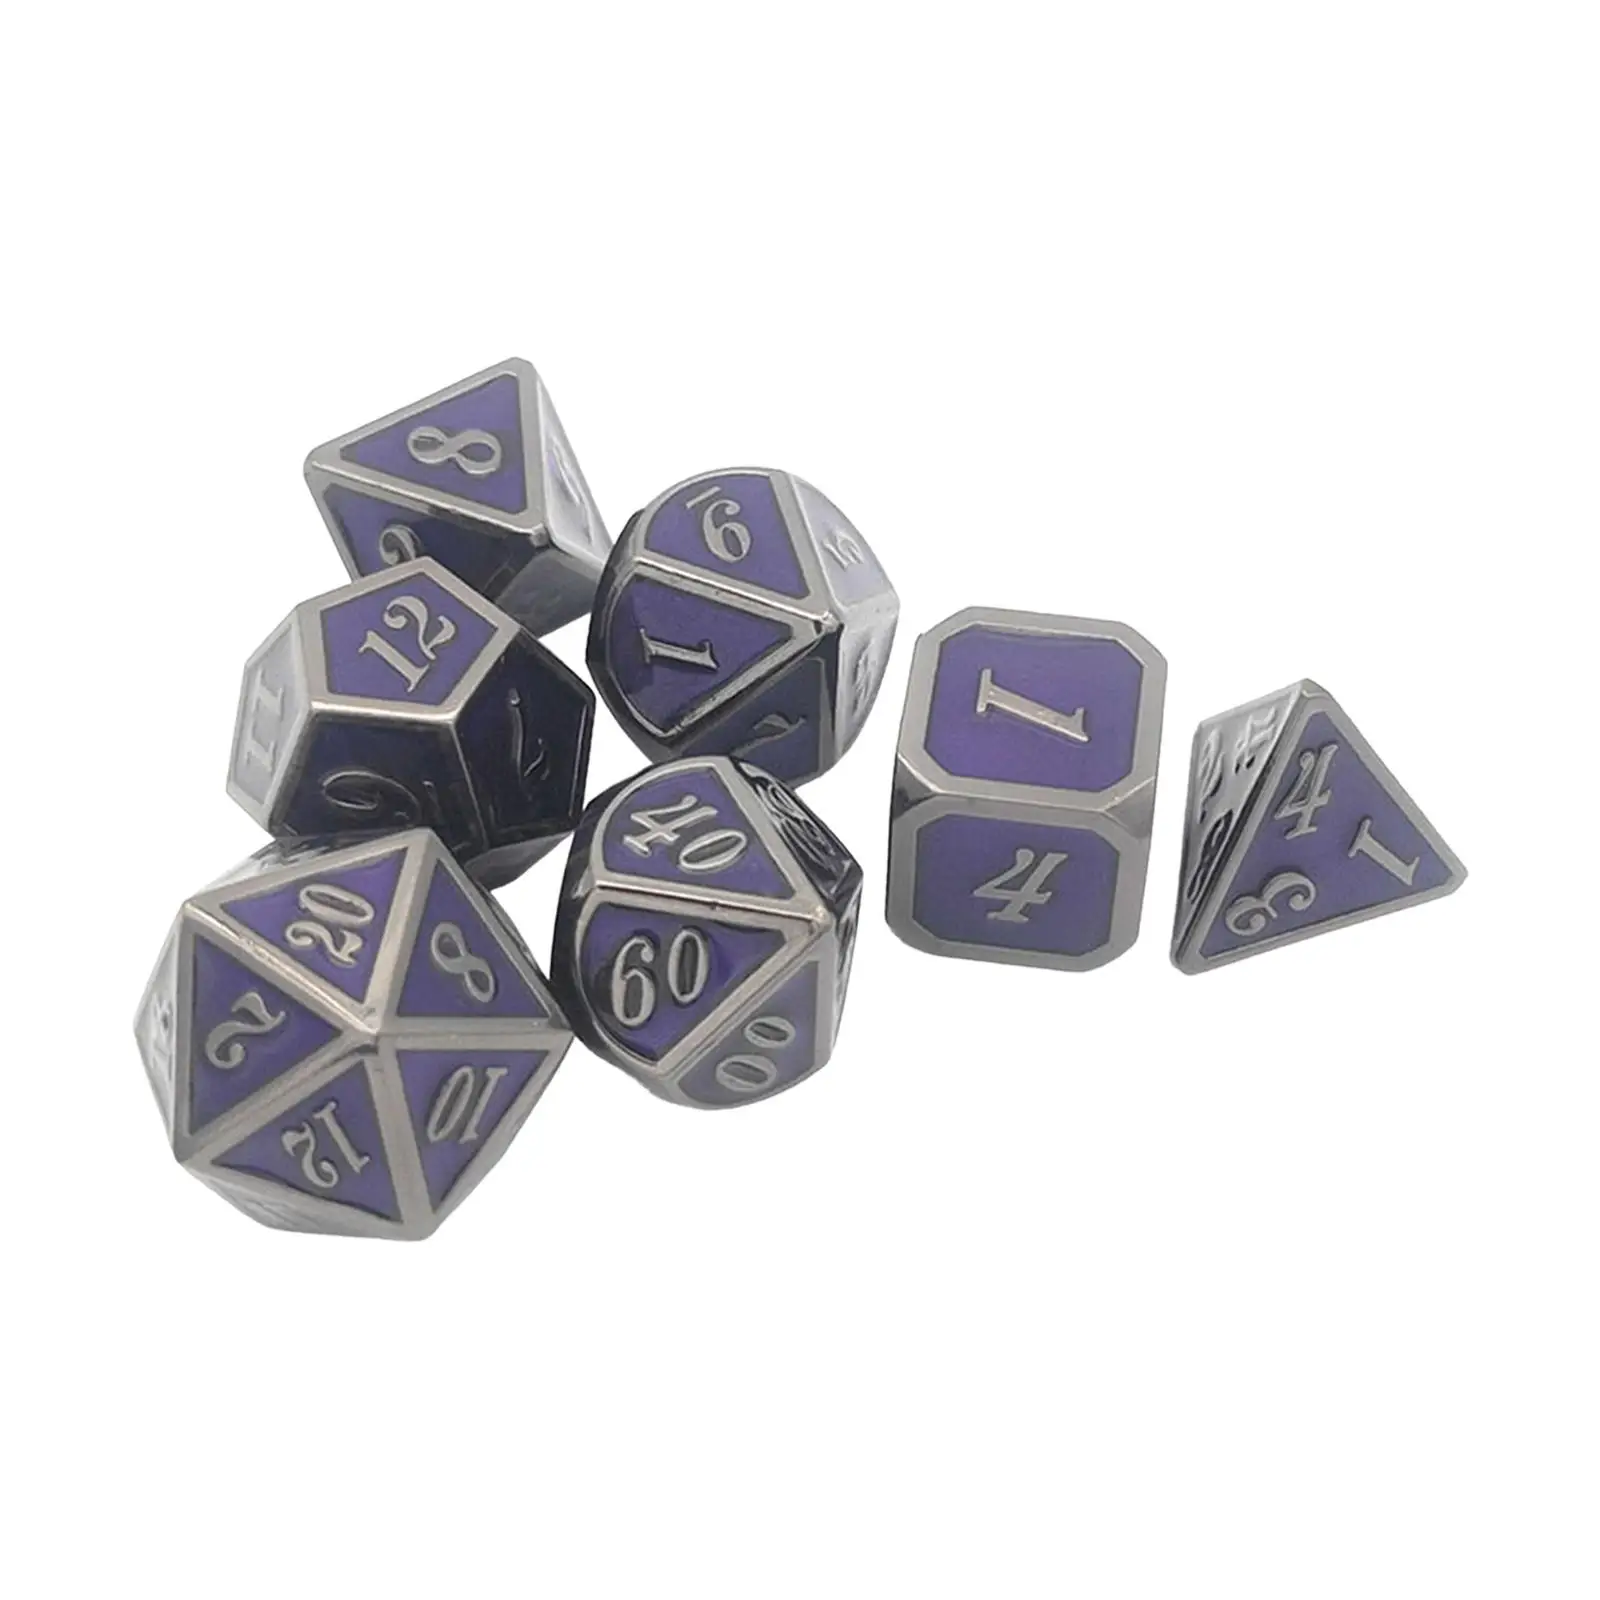 Metal Polyhedral Dice 7Pcs Set Handmade Versatile Reusable Smooth Surface Aluminum Alloy Accessory for Interactive Games